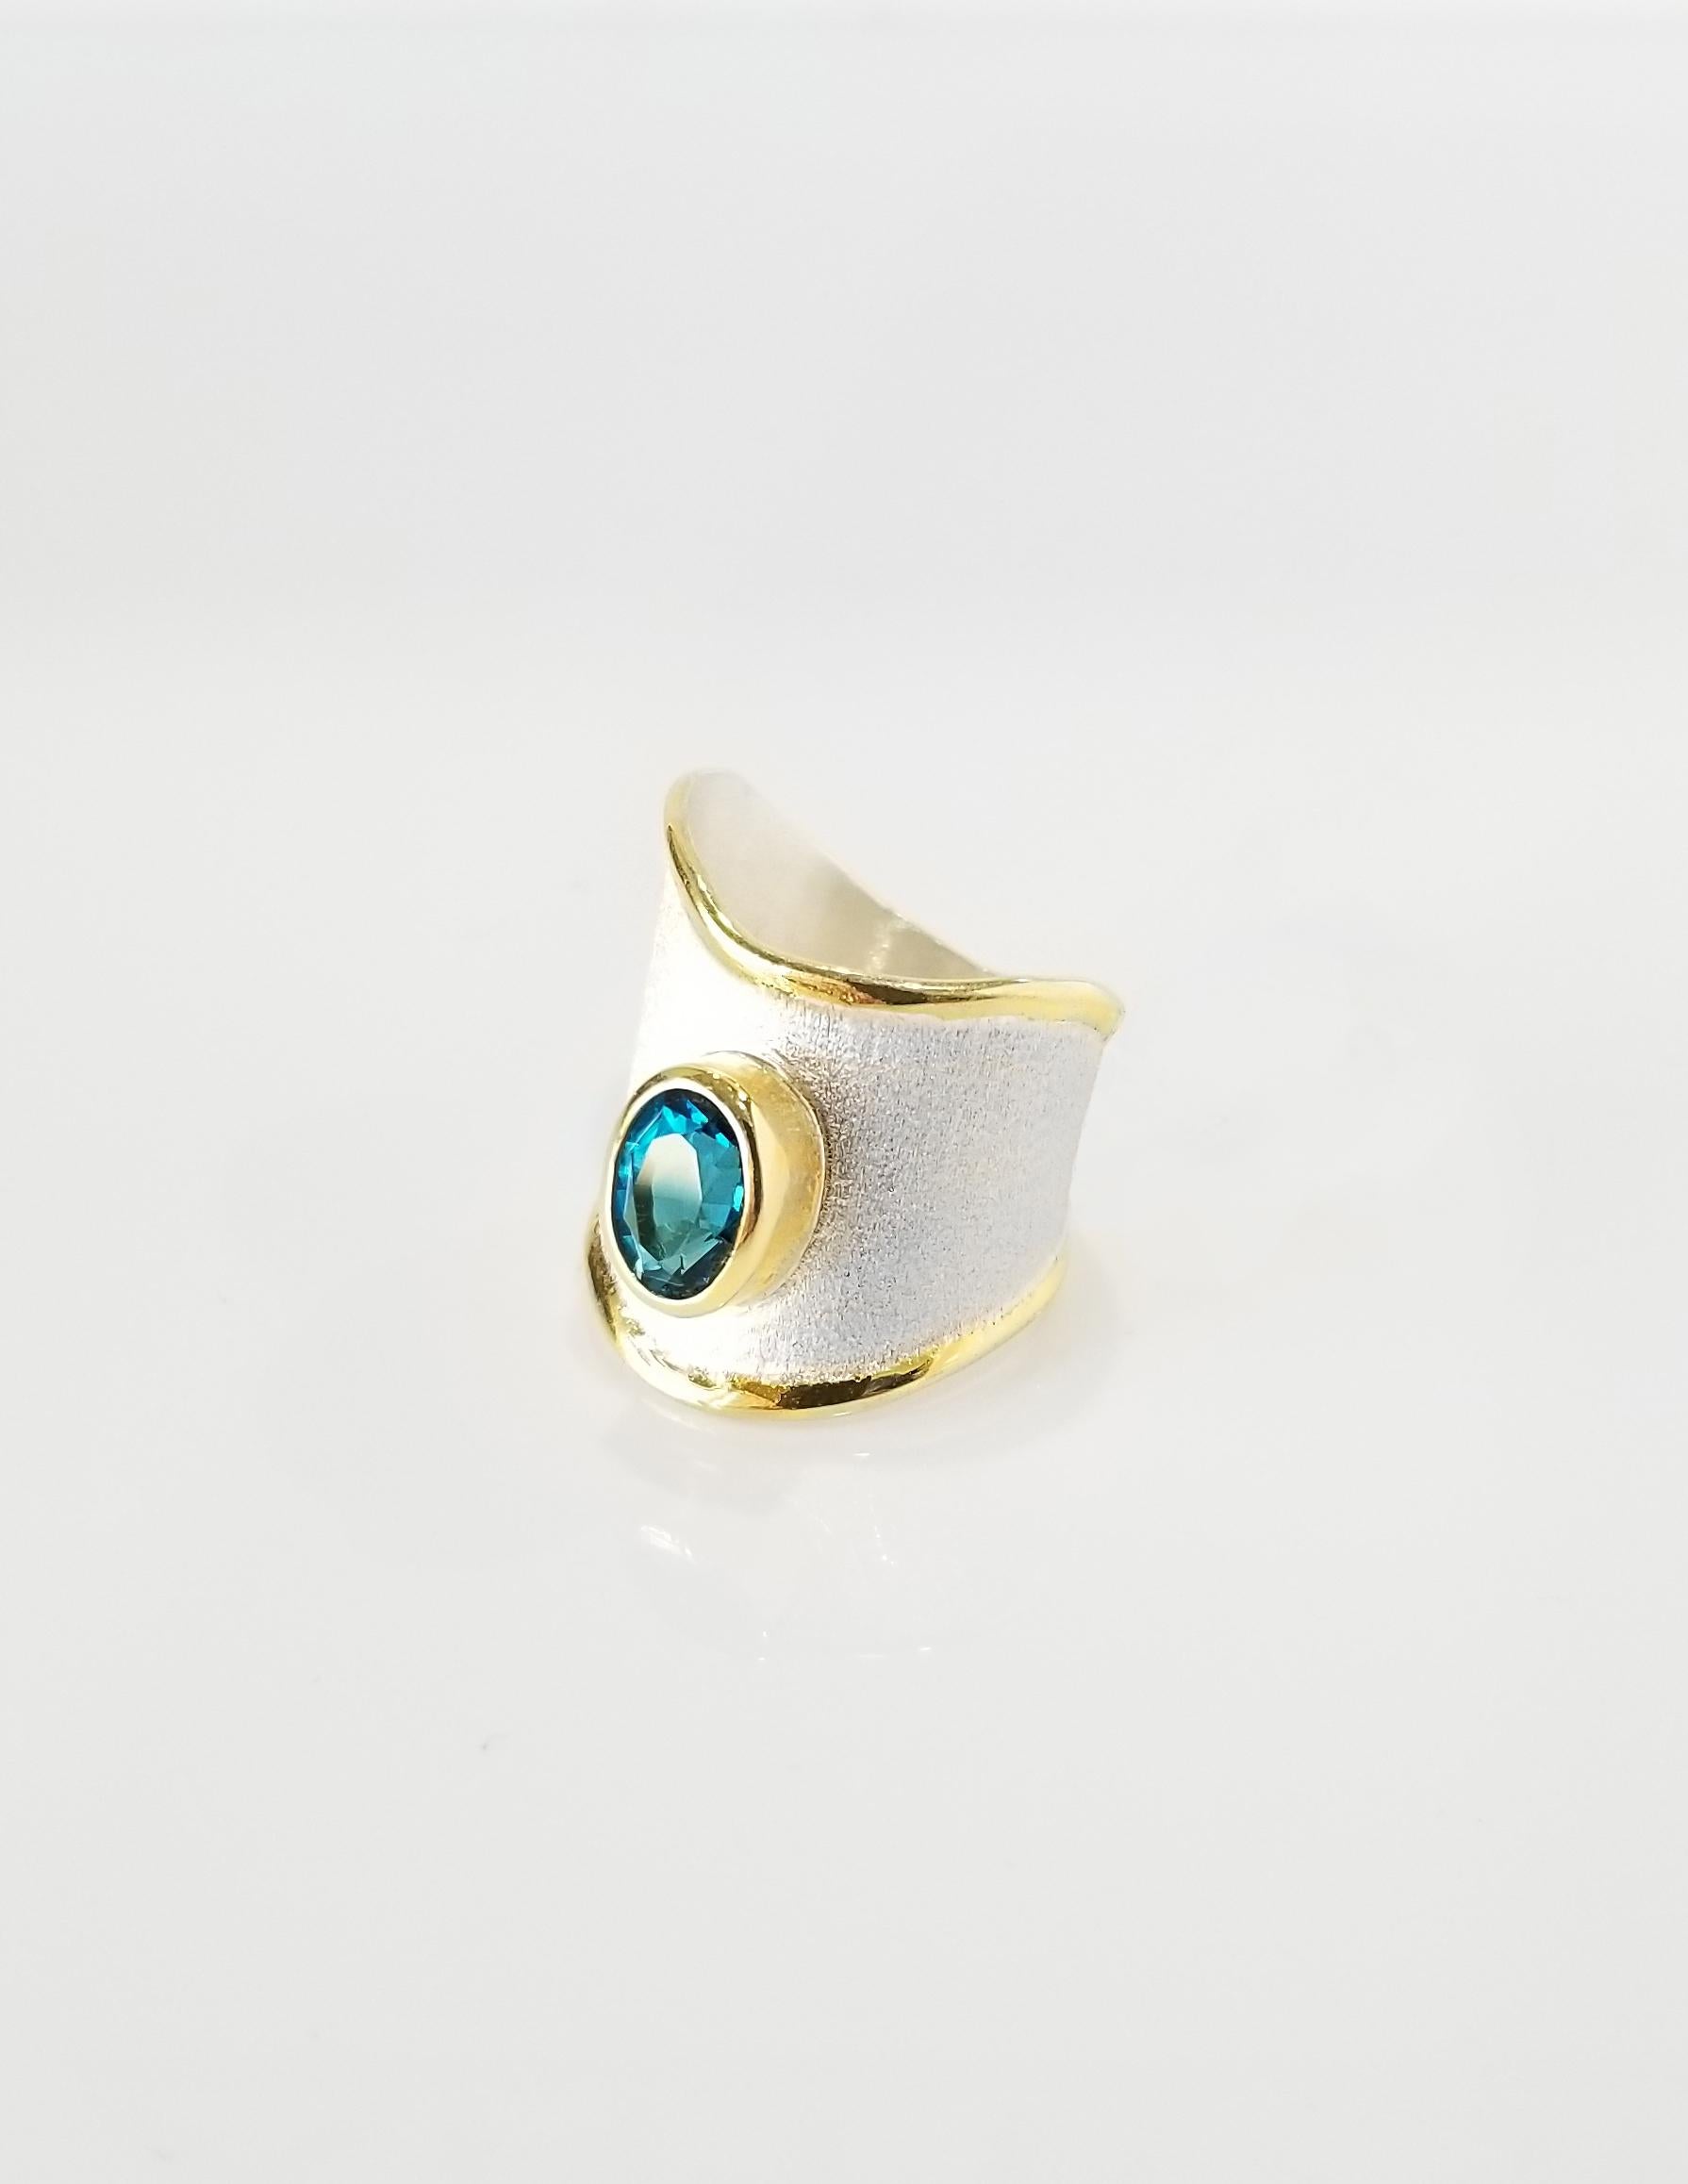 Yianni Creations Midas Collection 100% Handmade Artisan Ring from Fine Silver with a layover of 24 Karat Yellow Gold features a 1.60 Carat London Blue Topaz complemented by unique techniques of craftsmanship - brushed texture and nature-inspired